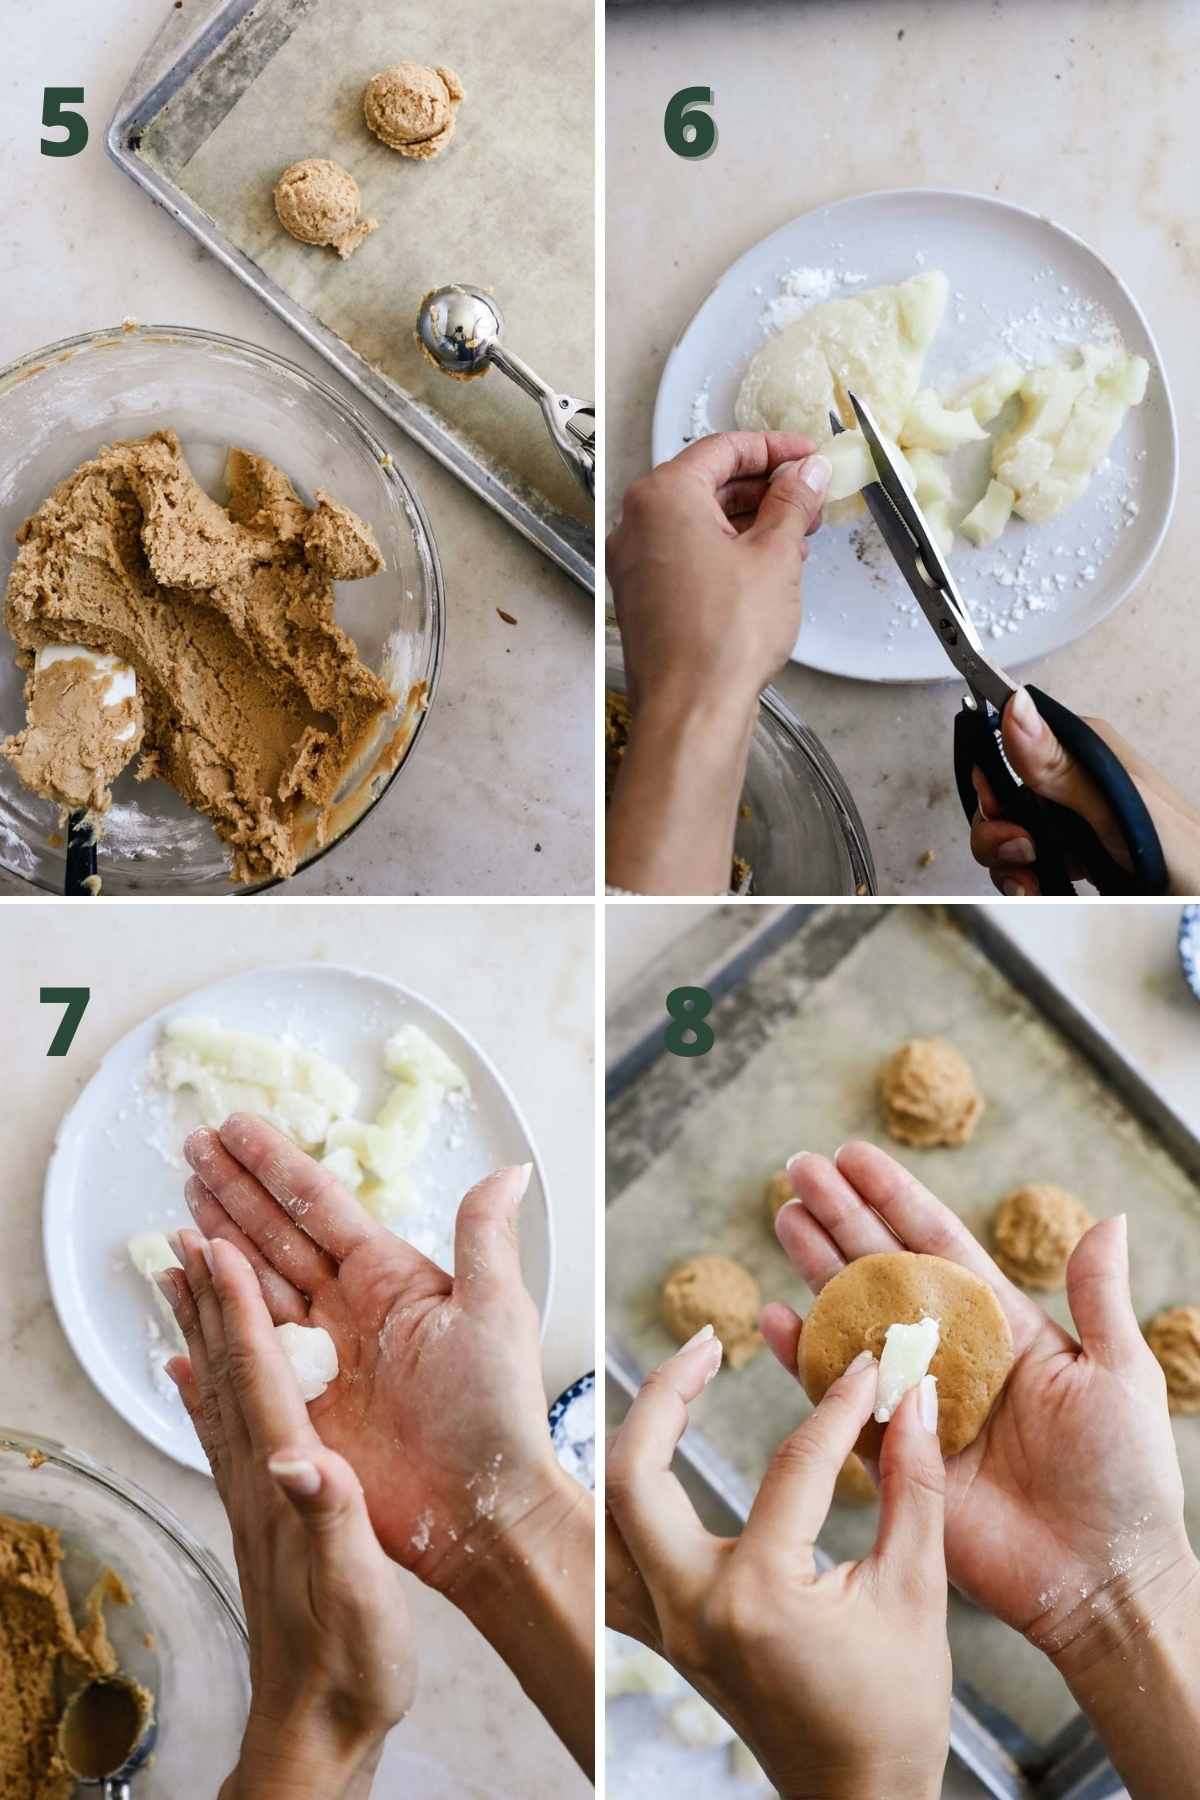 Steps to make mochi peanut butter cookies with miso, including making the dough balls, rolling the mochi, and stuffing the cookie dough with the mochi.